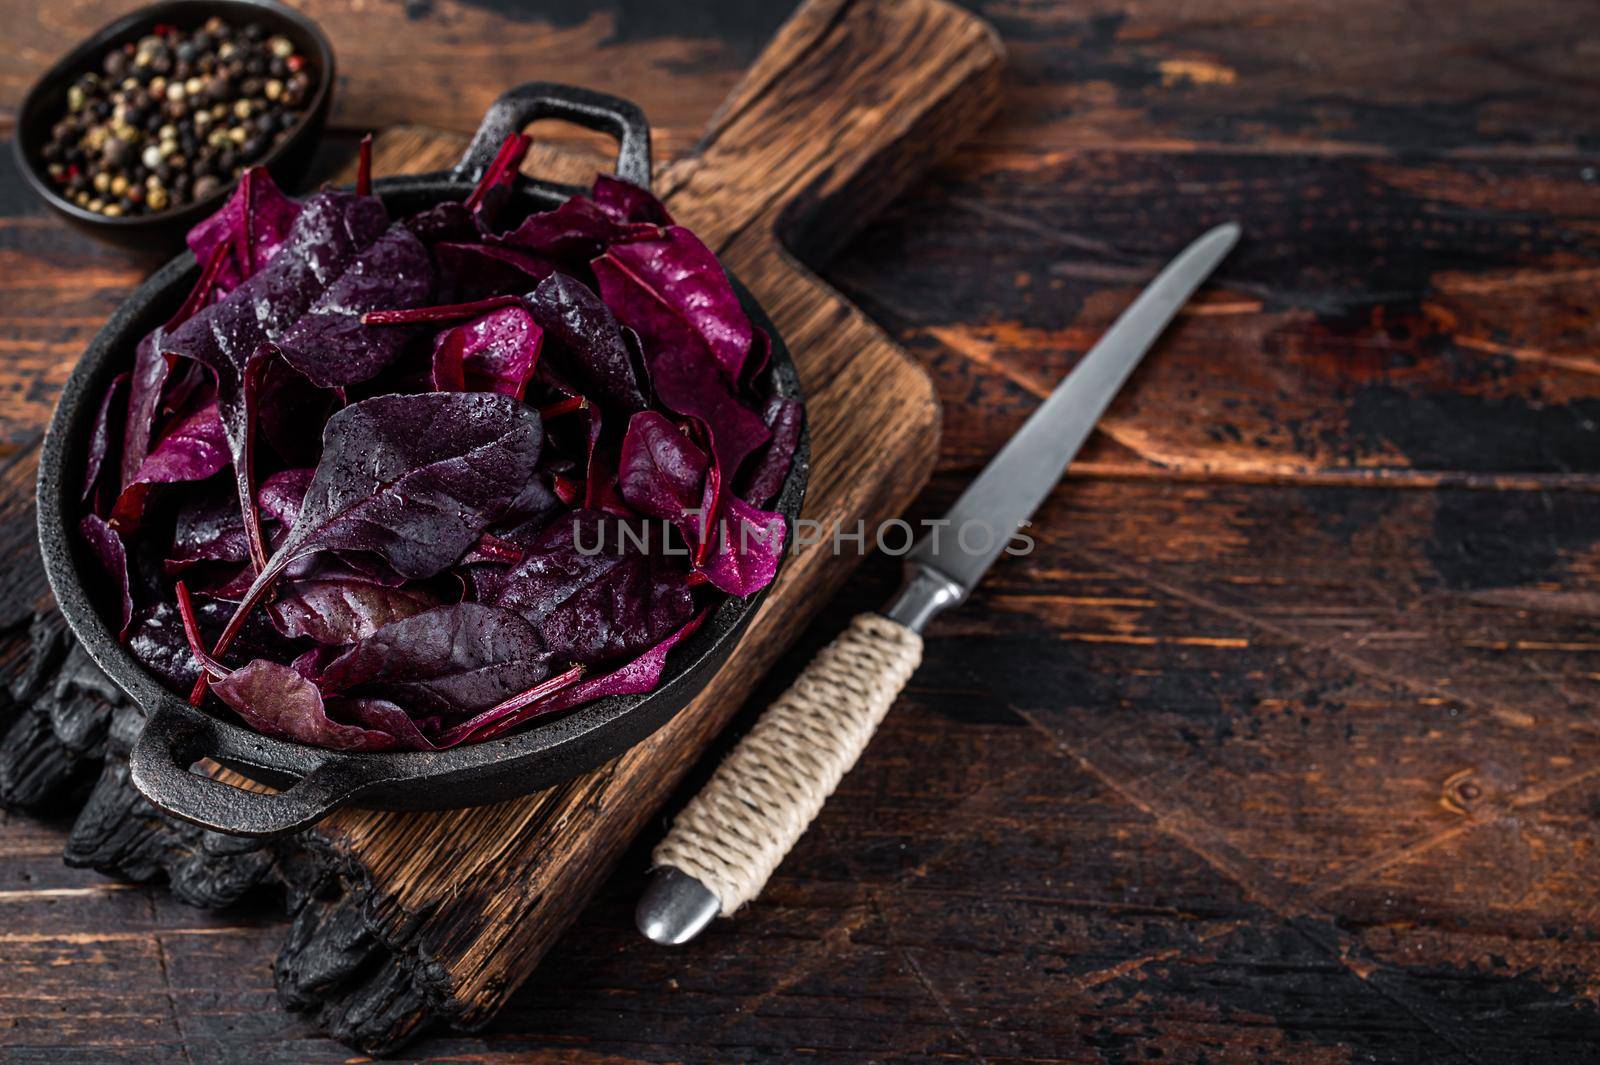 Swiss red chard or Mangold salad Leafs in a pan. Dark wooden background. Top view. Copy space.